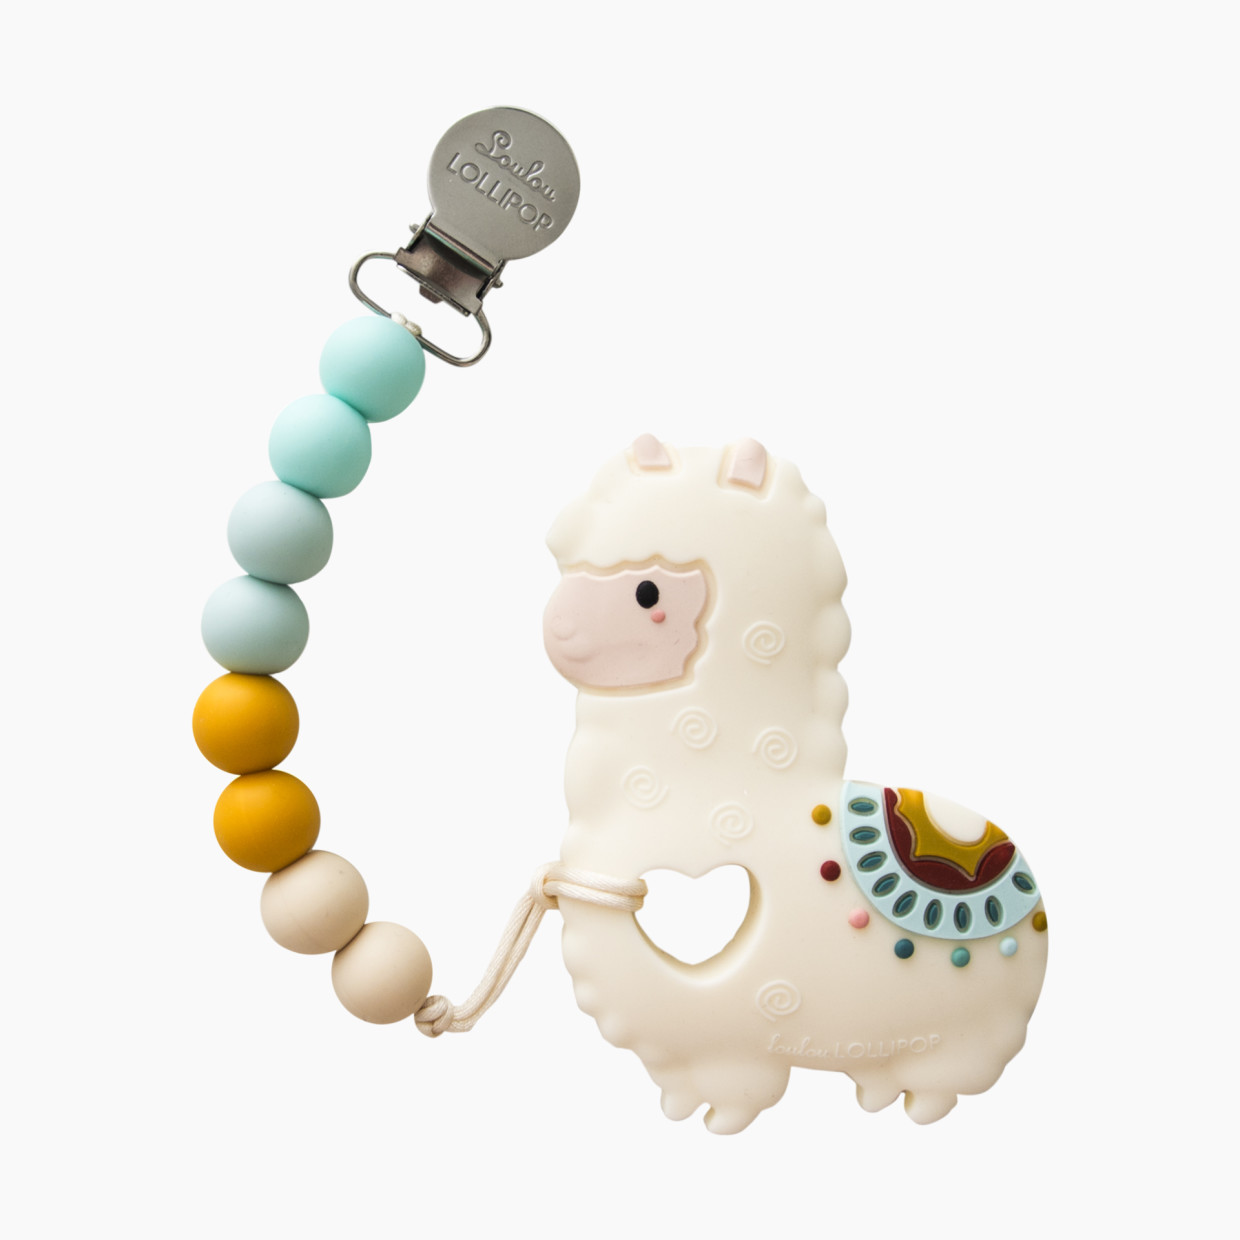 Loulou Lollipop Silicone Teether with Metal Clip - Llama (Blue & Orange).